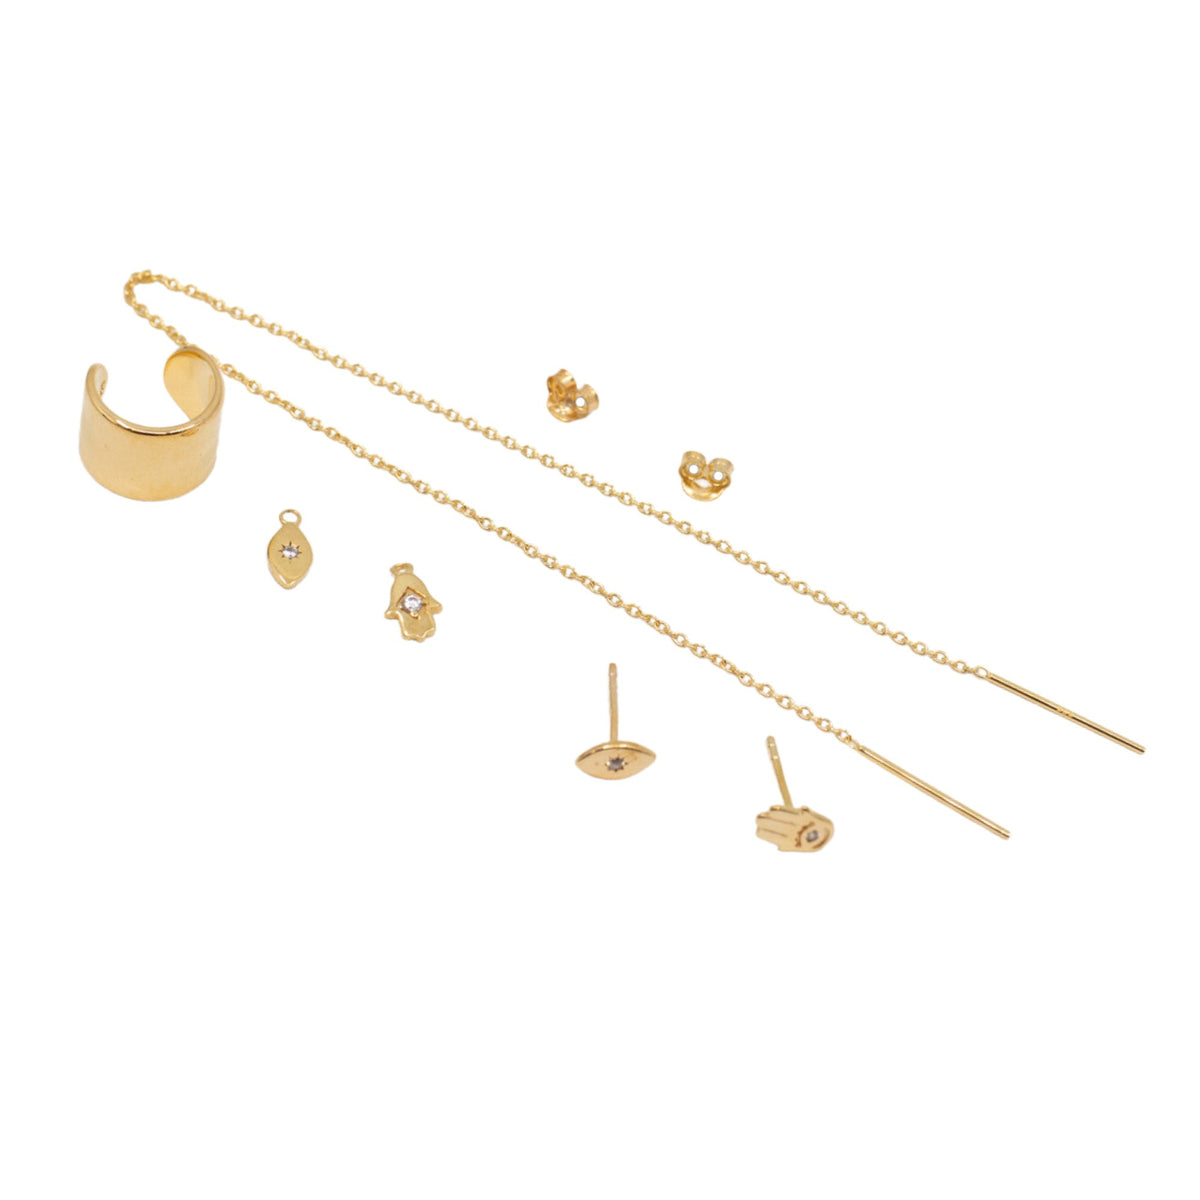 Yellow Gold Vermeil Curated Earring Sets Evil Eye Curated Set The Curated Lobeevil eyeevil eye earringsgold vermeil